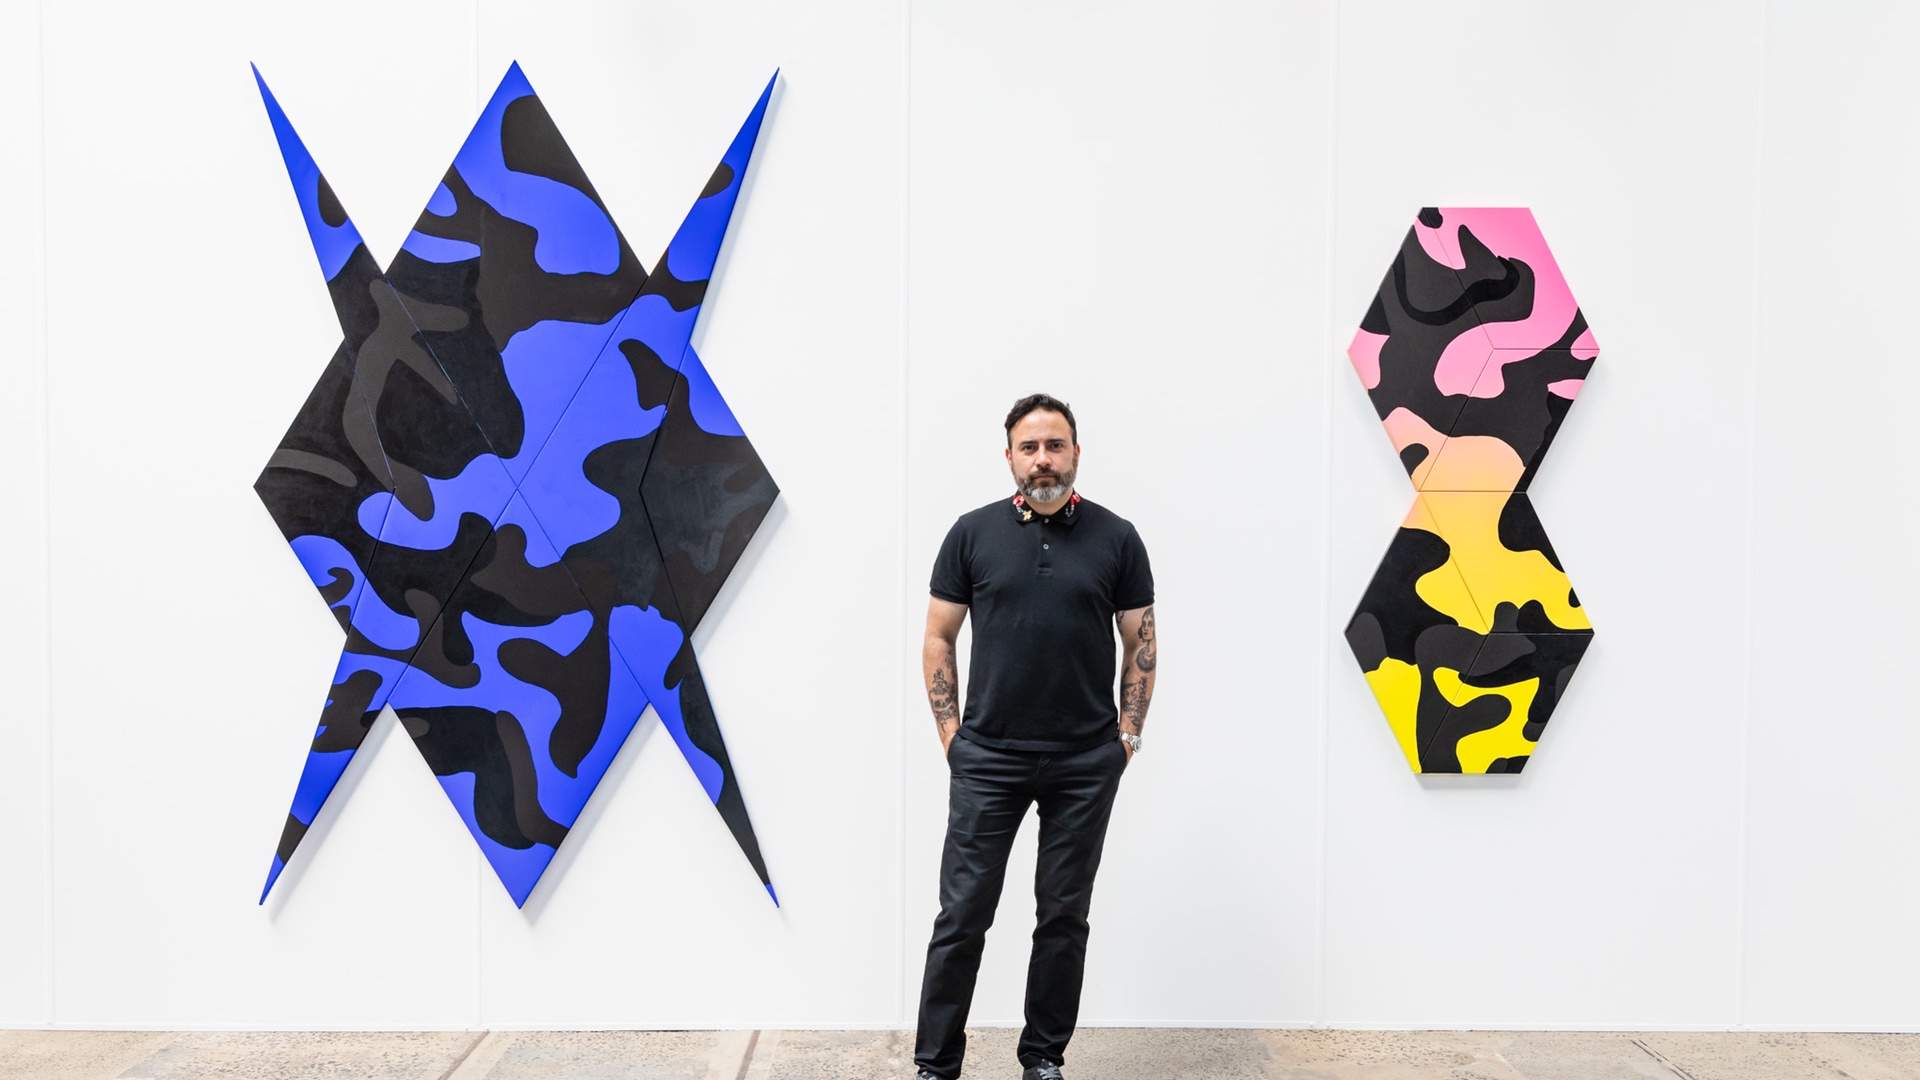 A Look Inside Sydney Contemporary's Mammoth 2018 Exhibition